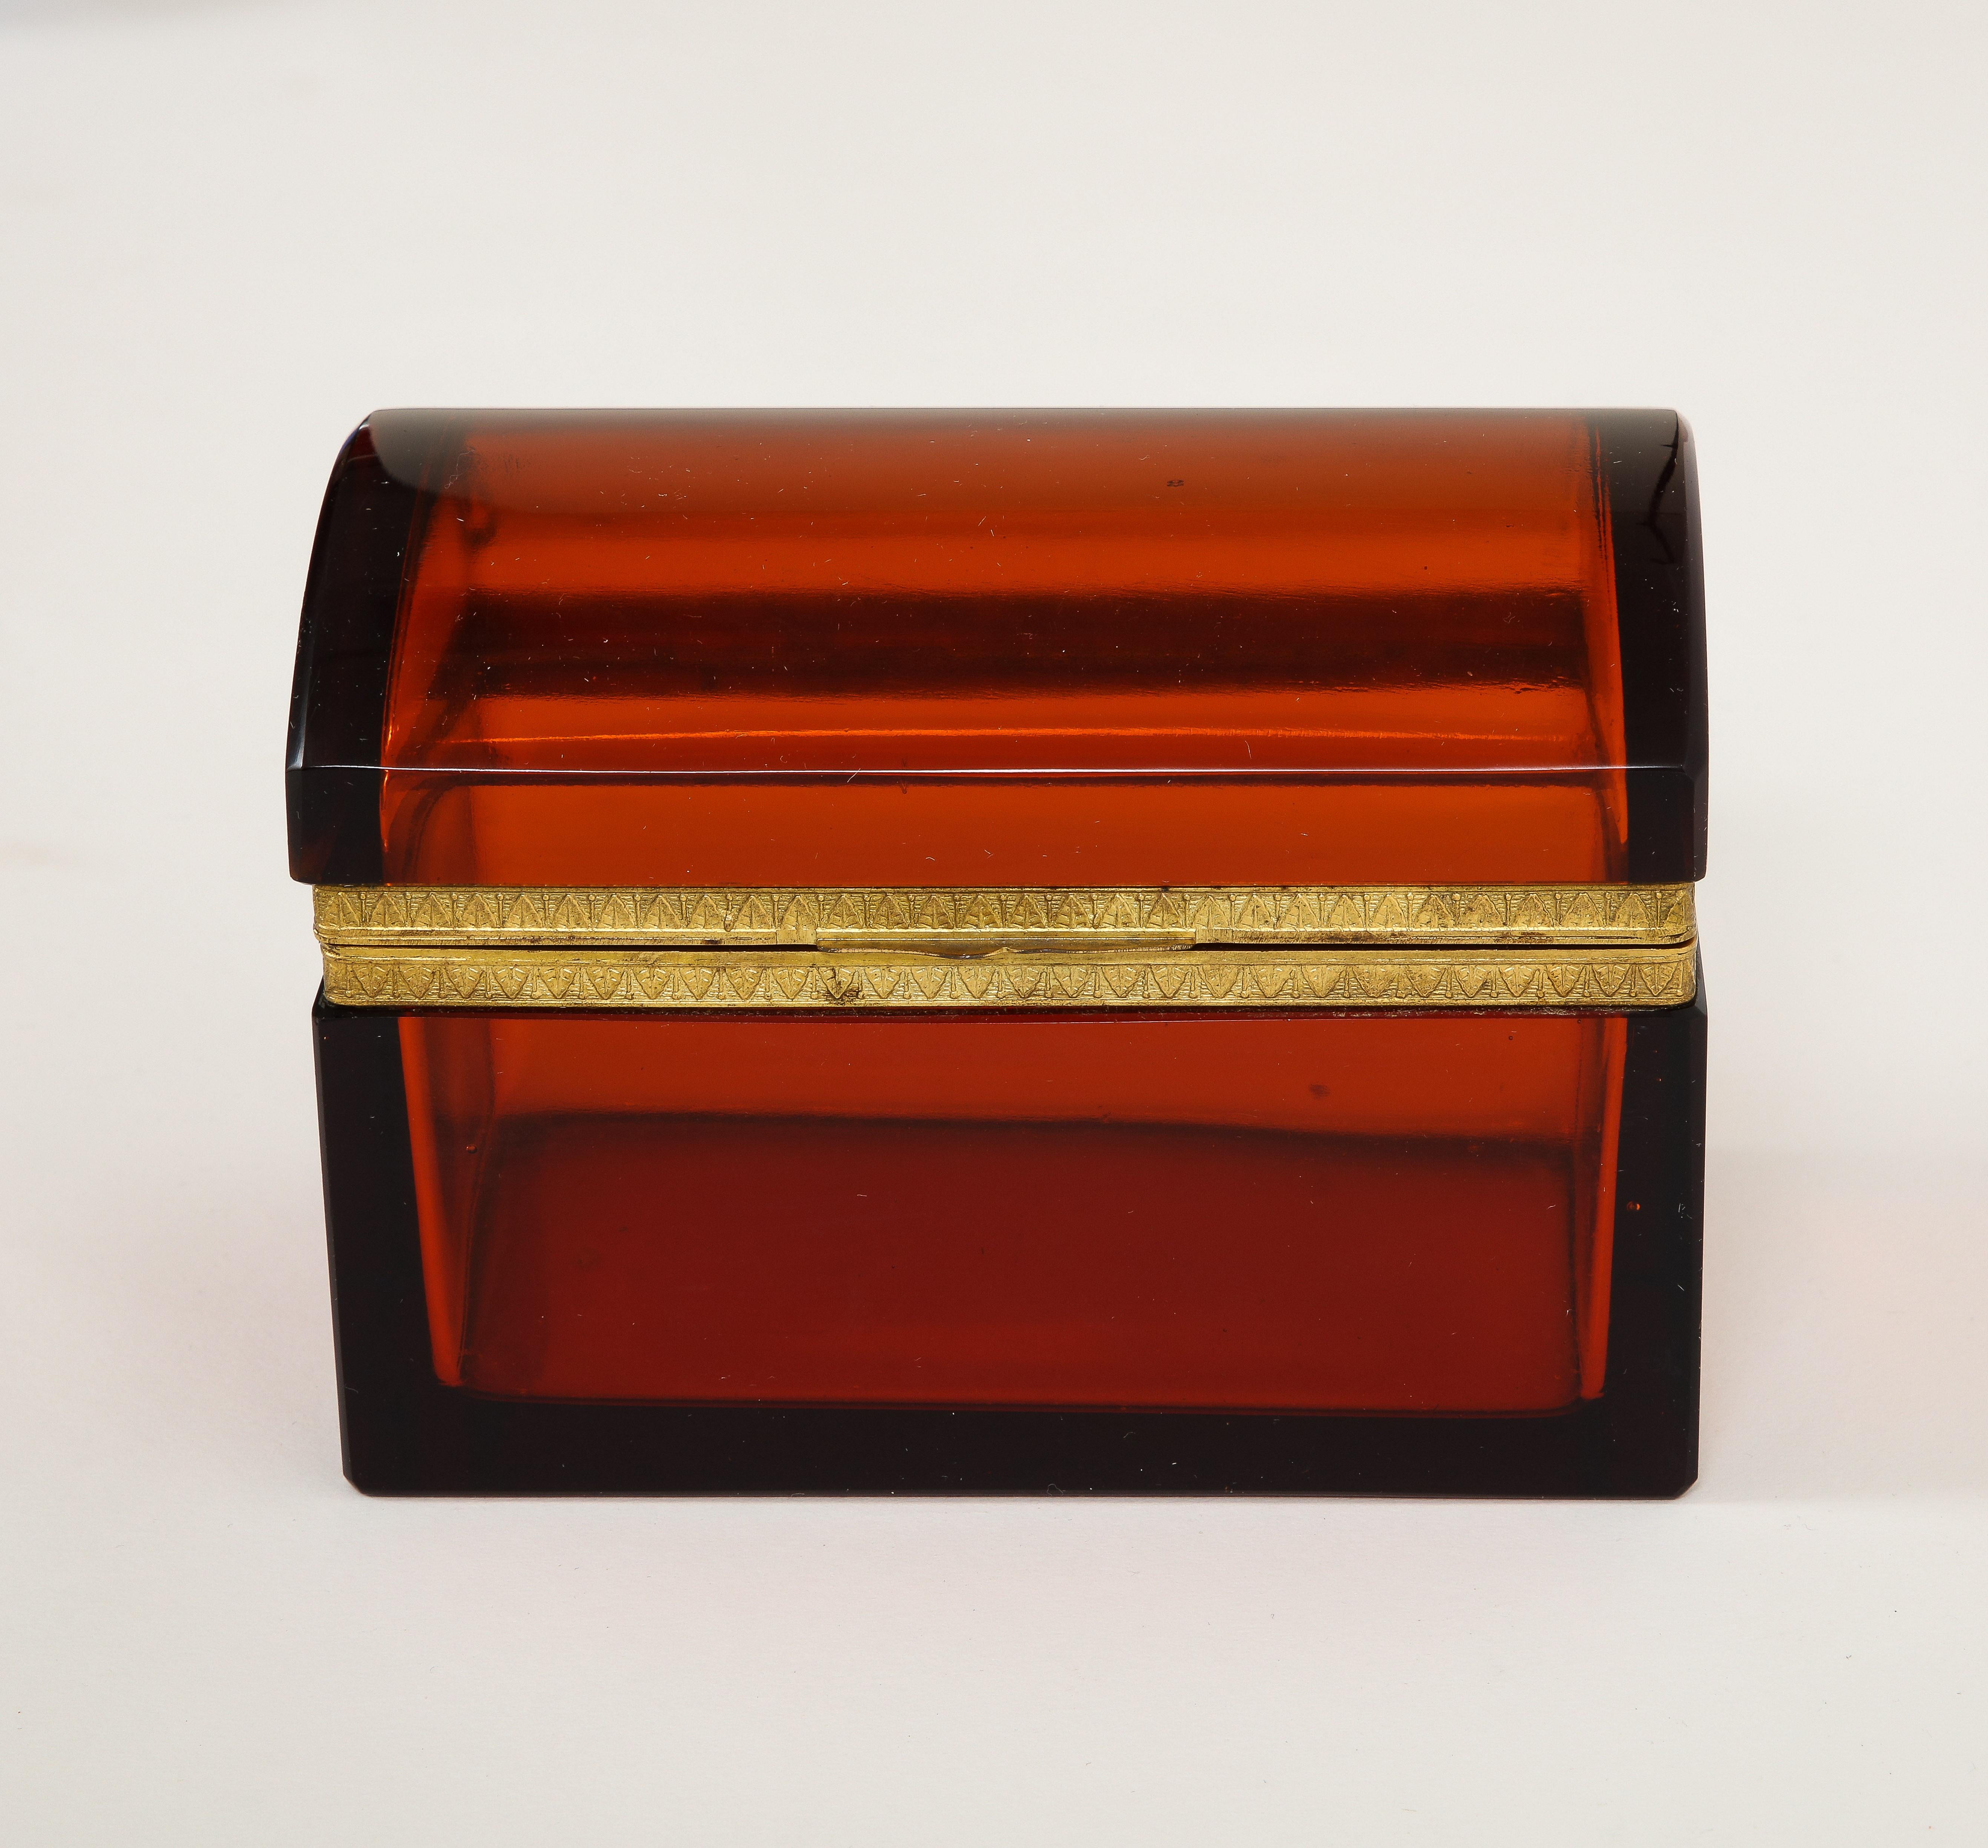 An Unusual 19th Century French Dore Bronze Mounted Orange/Red crystal box. The box is composed of two sections of French orange/red crystal which are mounted to a fabulous dore bronze latch. The doe bronze is beautifully hand-chassed and